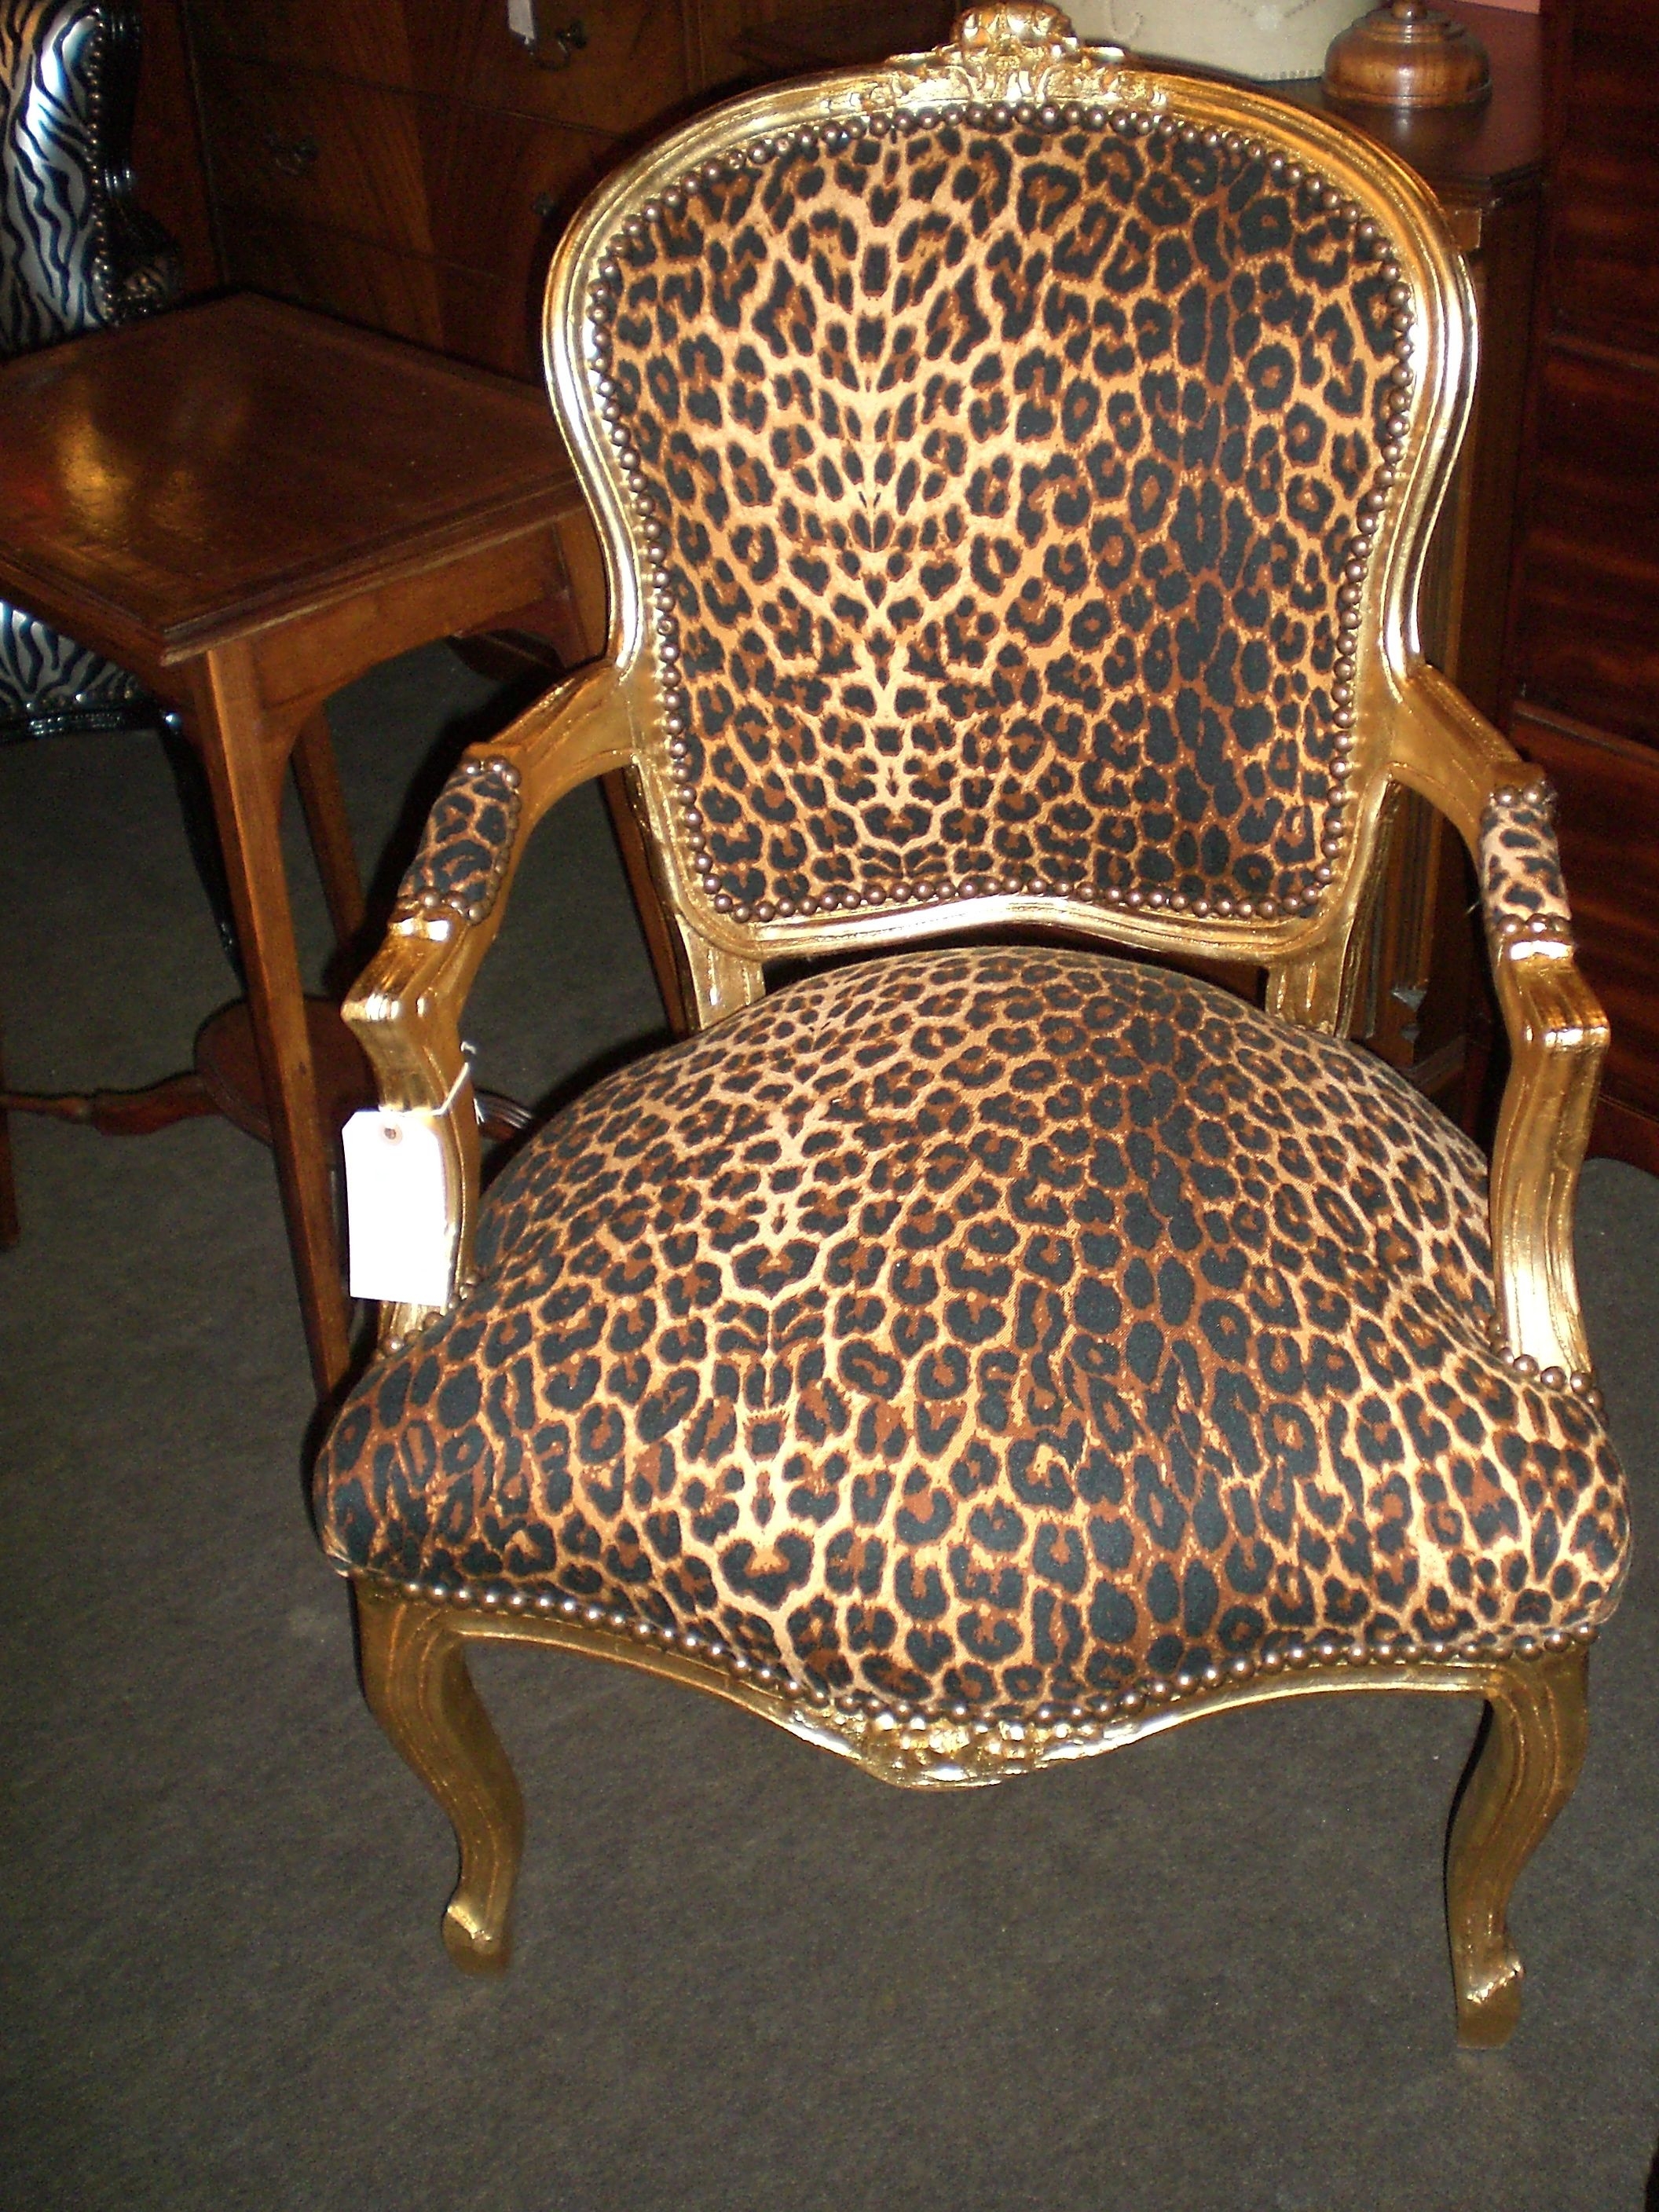 Animal print accent chairs